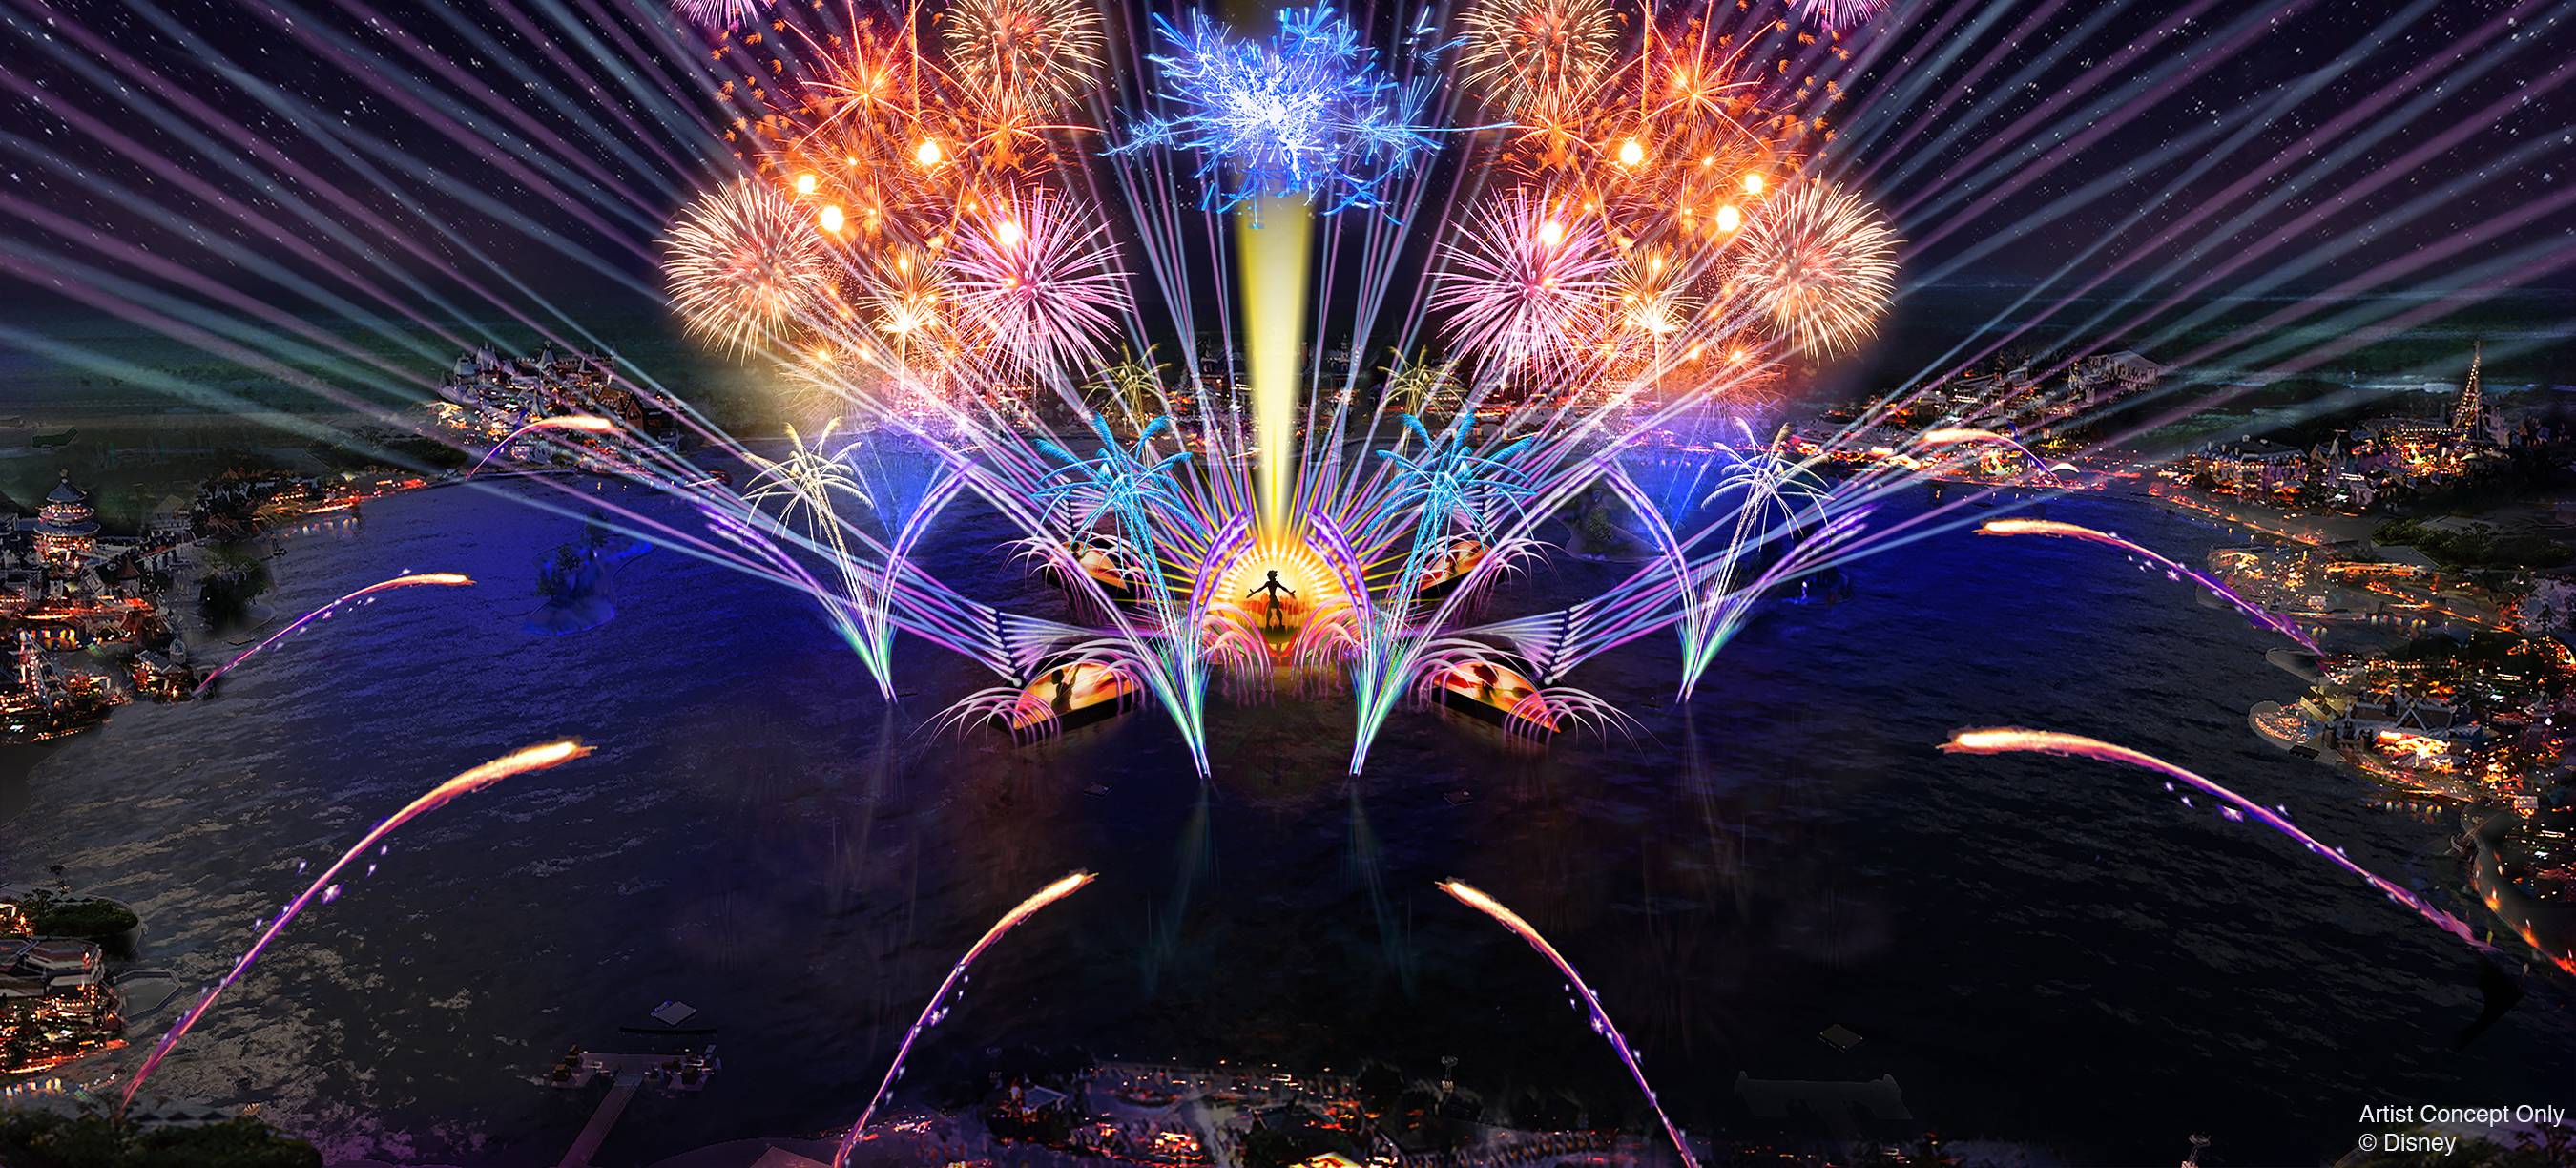 PHOTO - Epcot's new nighttime spectacular to be called 'HarmonioUS'